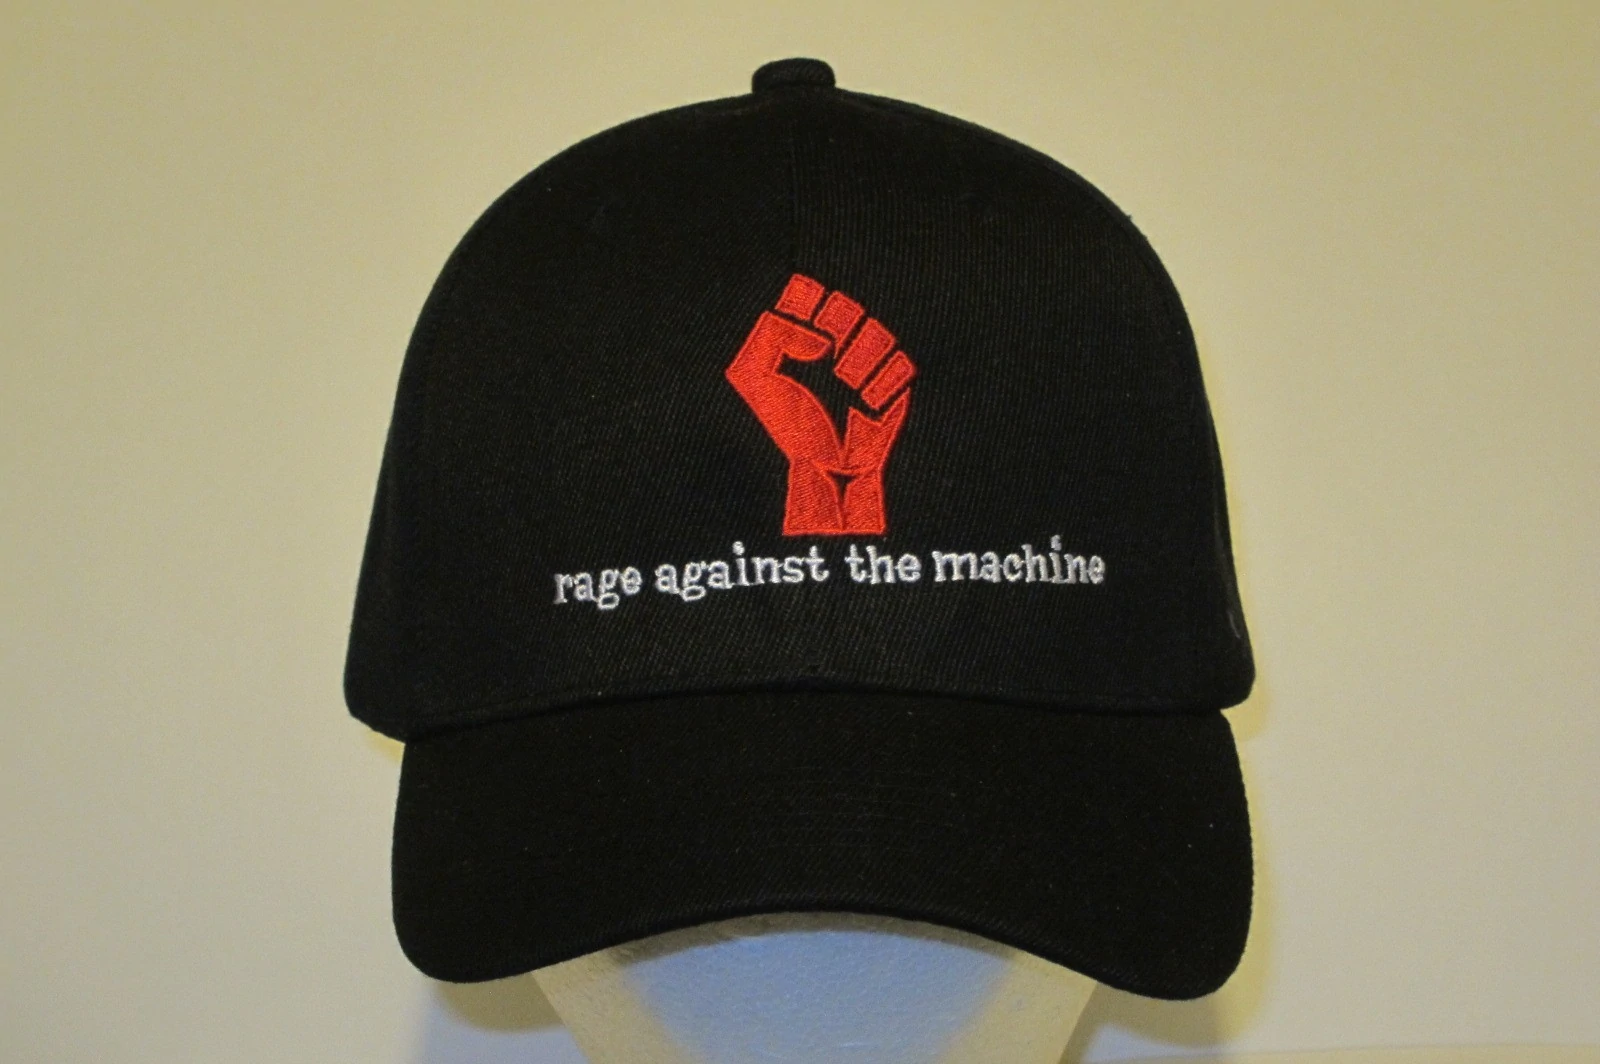 RAGE AGAINST THE MACHINE- Embroidered Baseball Cap. One Size Fits All. Velcro Back.Unisex